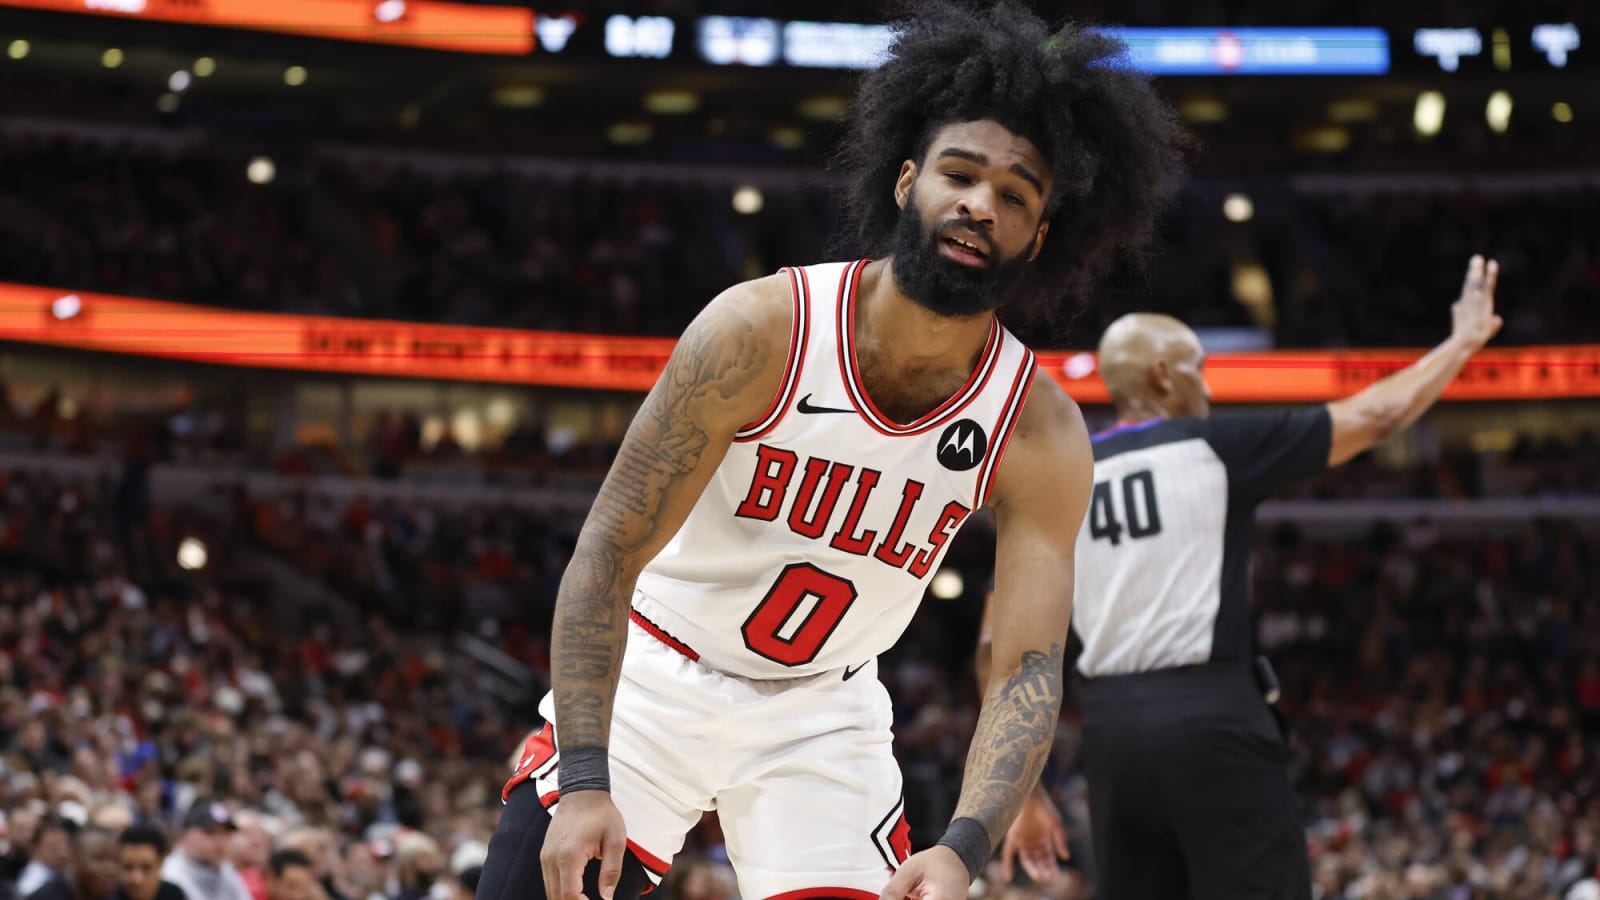 Report: Bulls’ Coby White Now ‘Off-Limits’ In Trade Talks